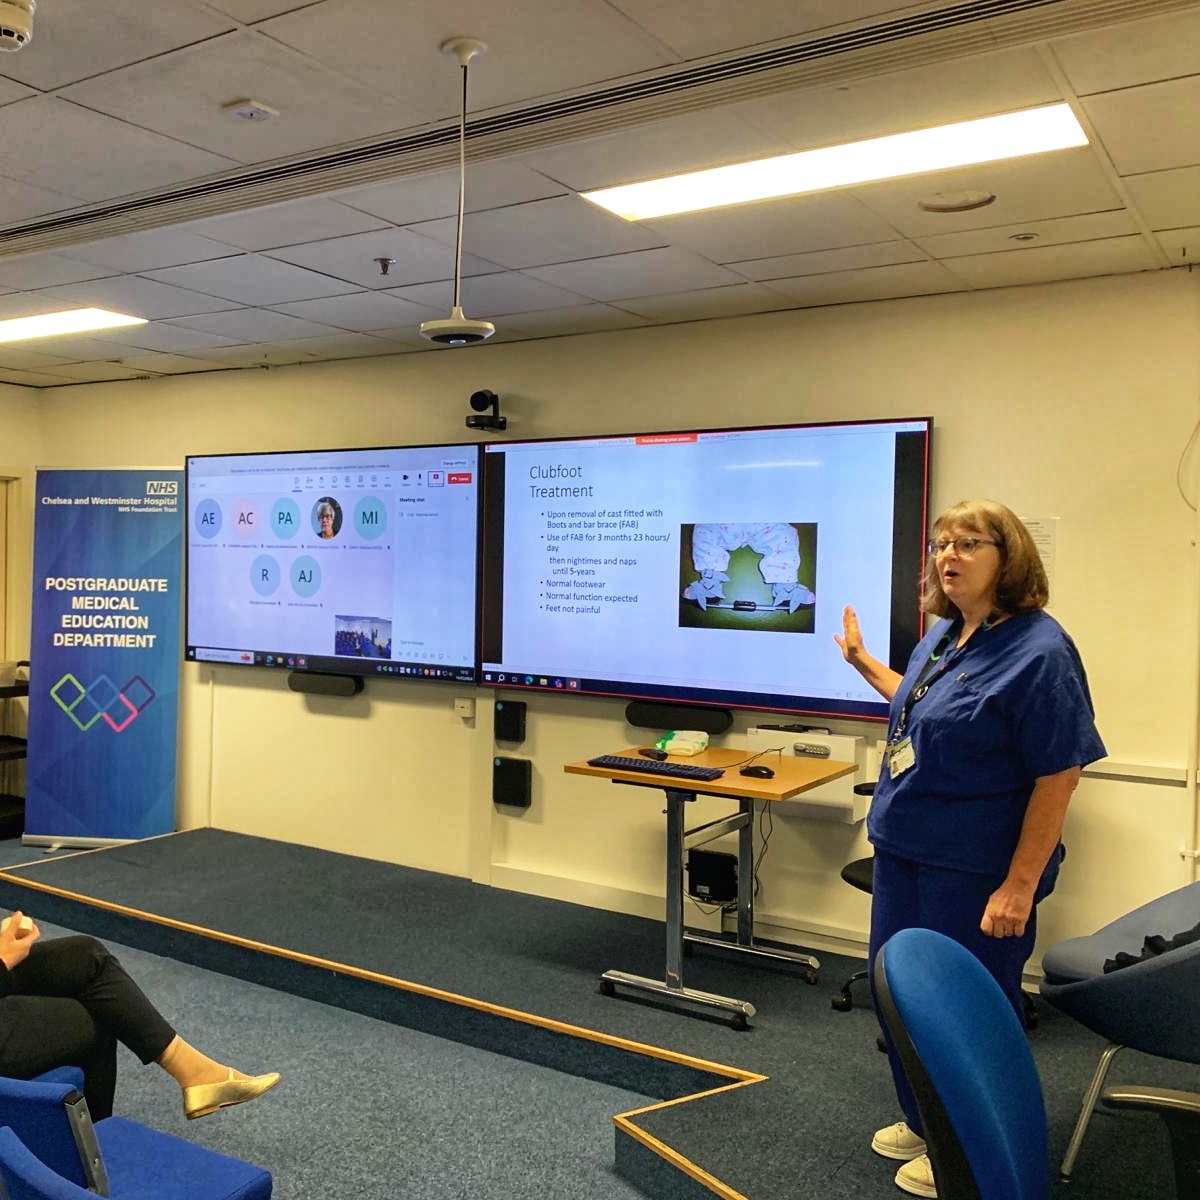 GCI Trustee Denise Watson-Tann and GCI CEO Ros Owen took to the stage at @ChelseaandWestminsterhopistal's Grand Rounds to discuss clubfoot and its treatment. Together, we're spreading knowledge about clubfoot. #ClubfootAwareness #GrandRounds #GCI #ChelseaAndWestminster